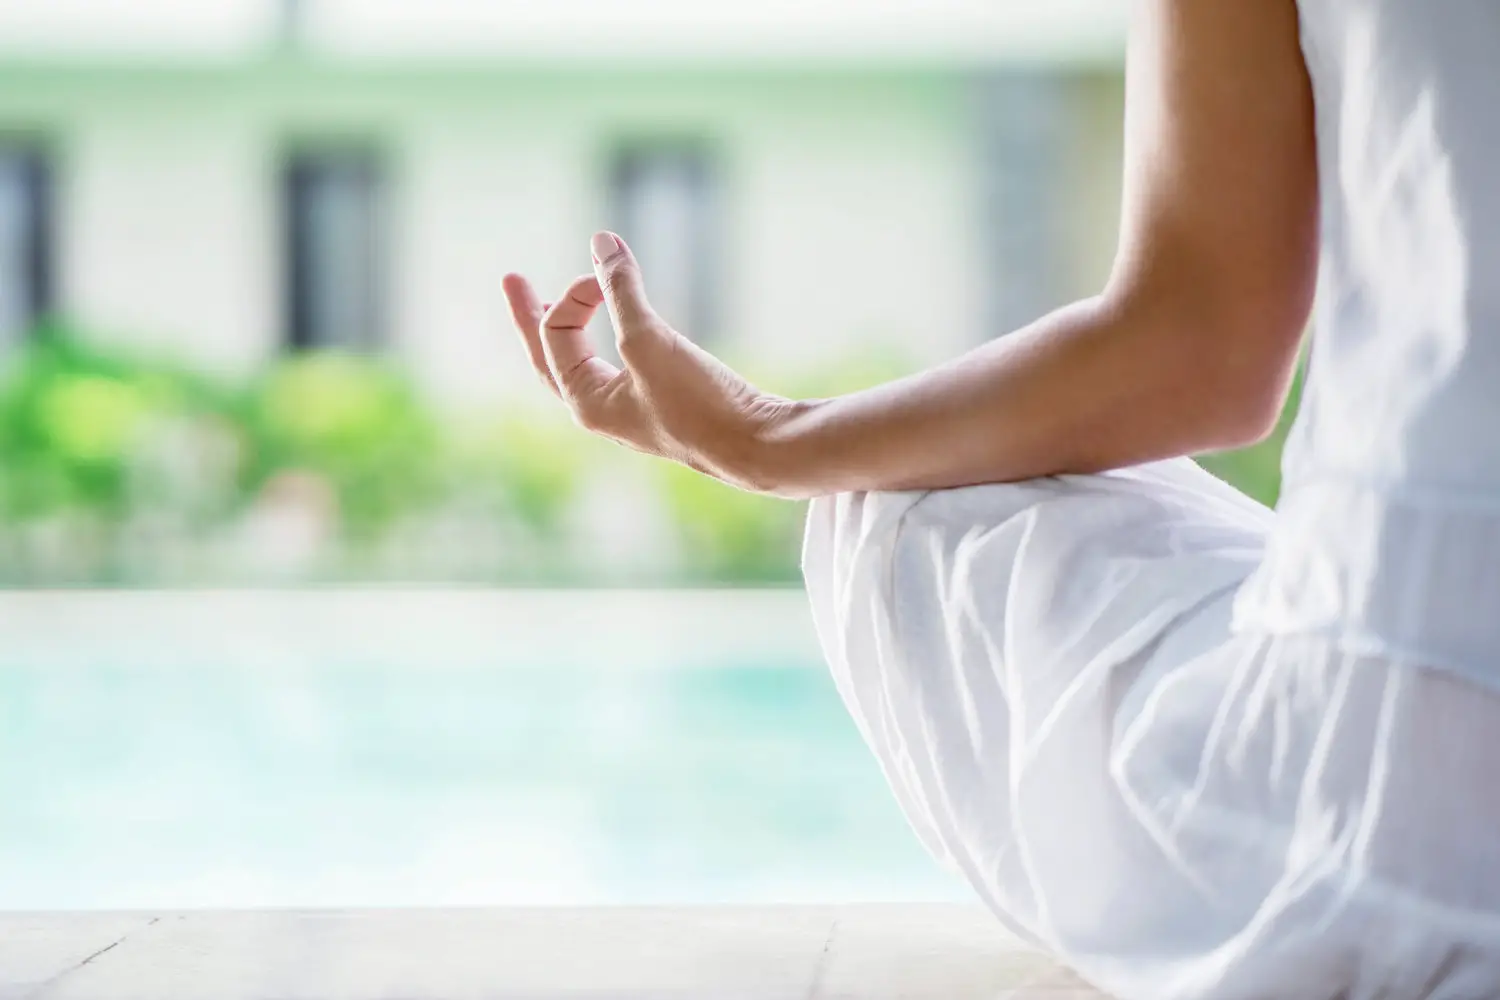 Learn the Language Of Your Body With Meditation